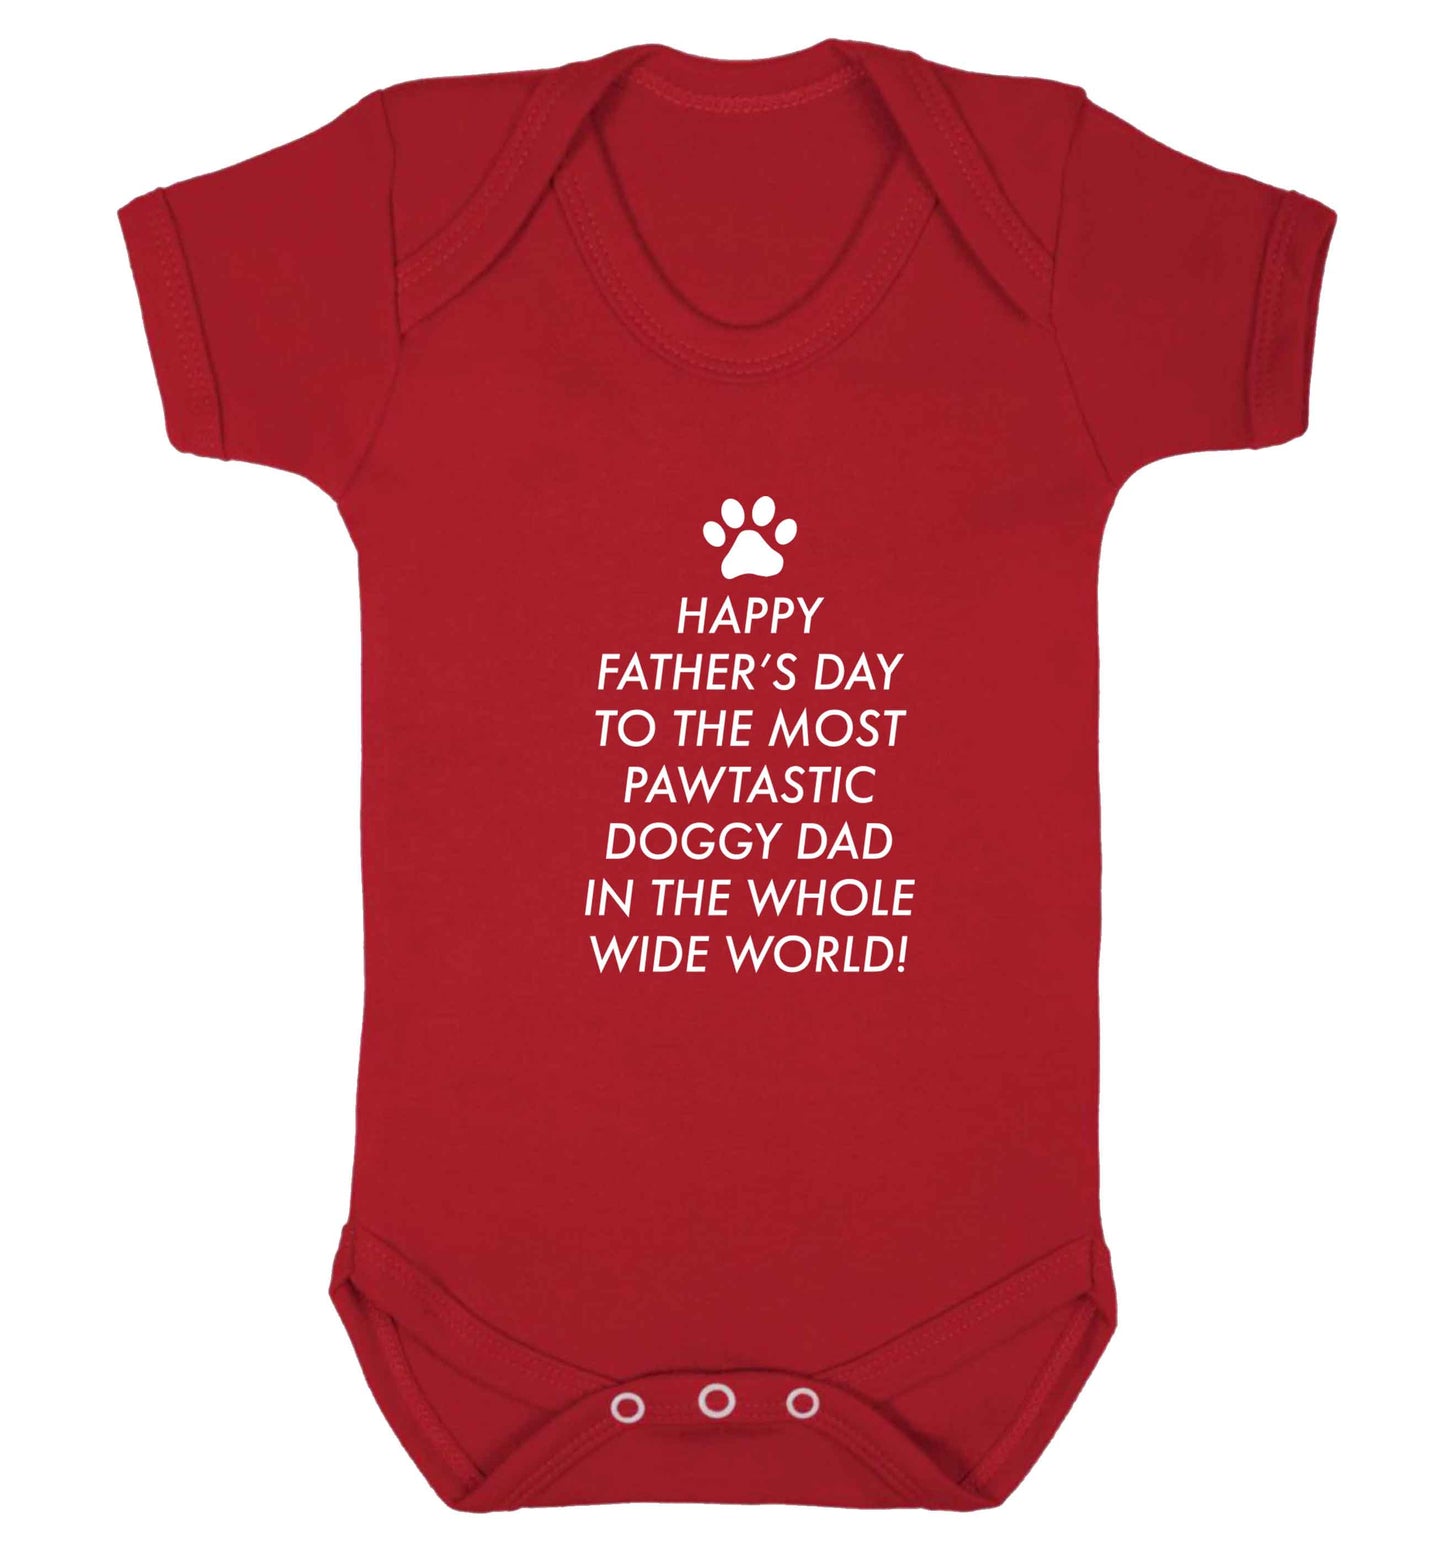 Happy Father's day to the most pawtastic doggy dad in the whole wide world!baby vest red 18-24 months